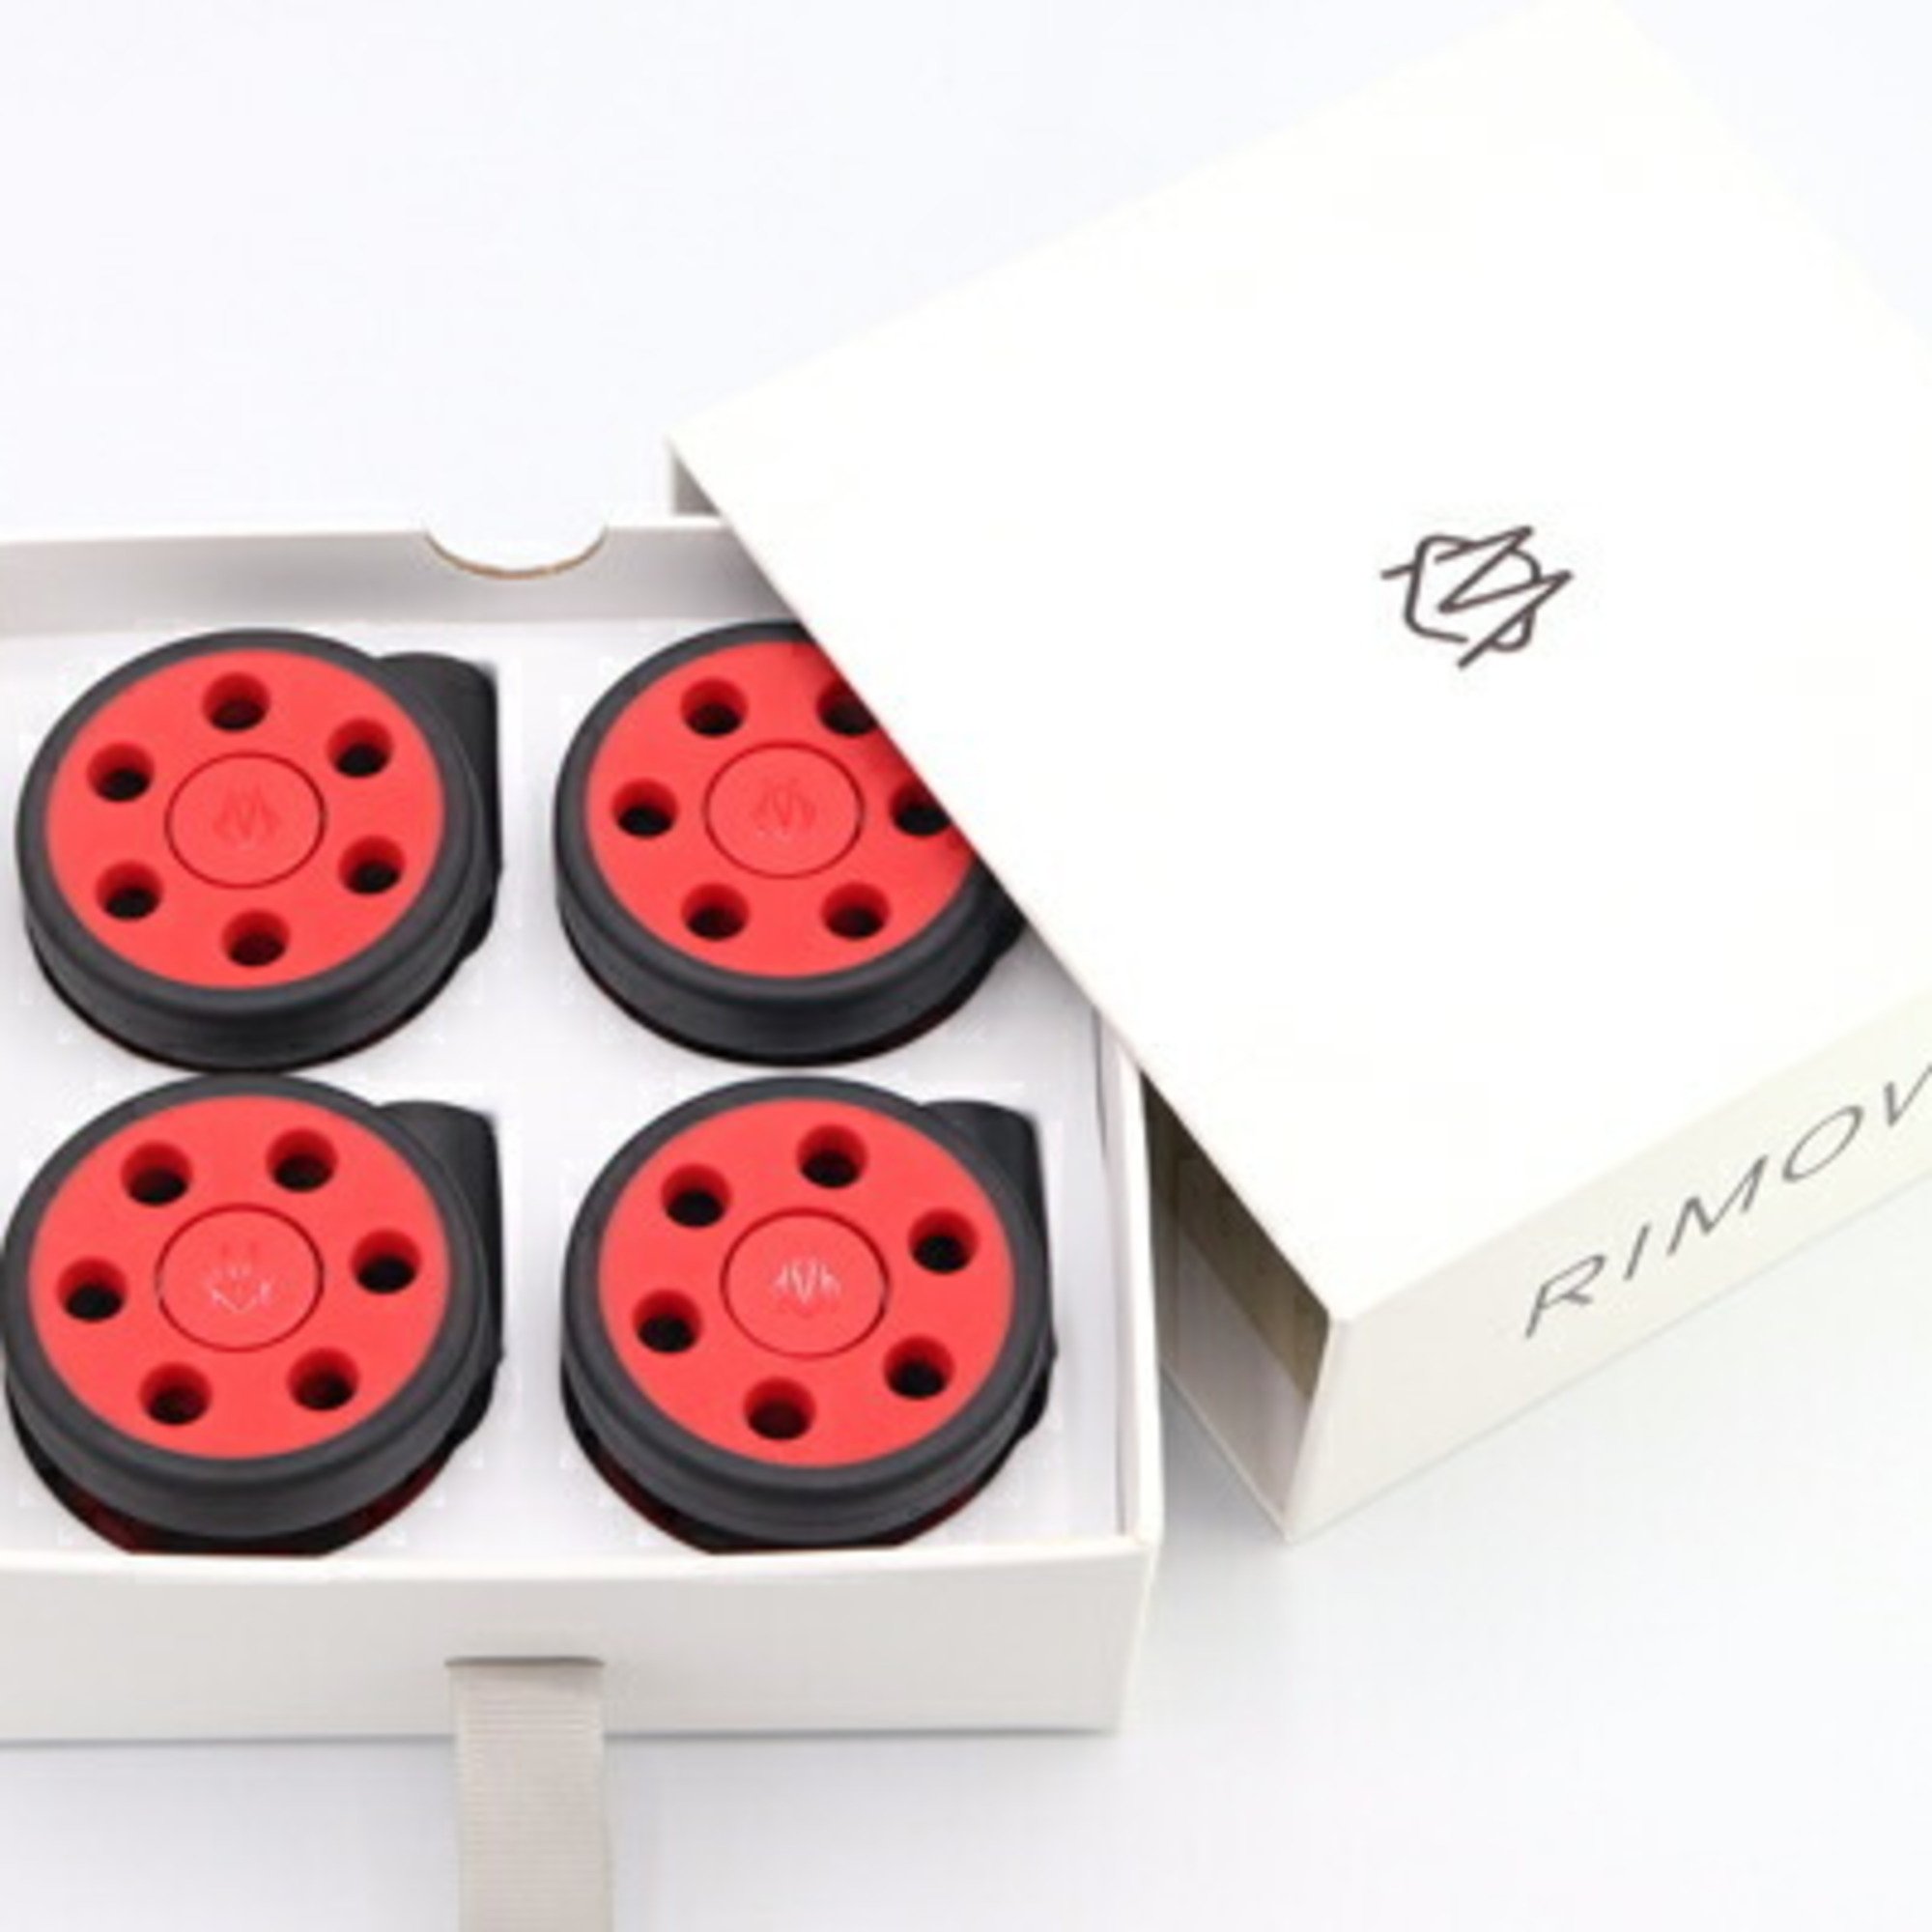 RIMOWA Wheel Set for Classic Black Red Carry Case Bag Tire Customization